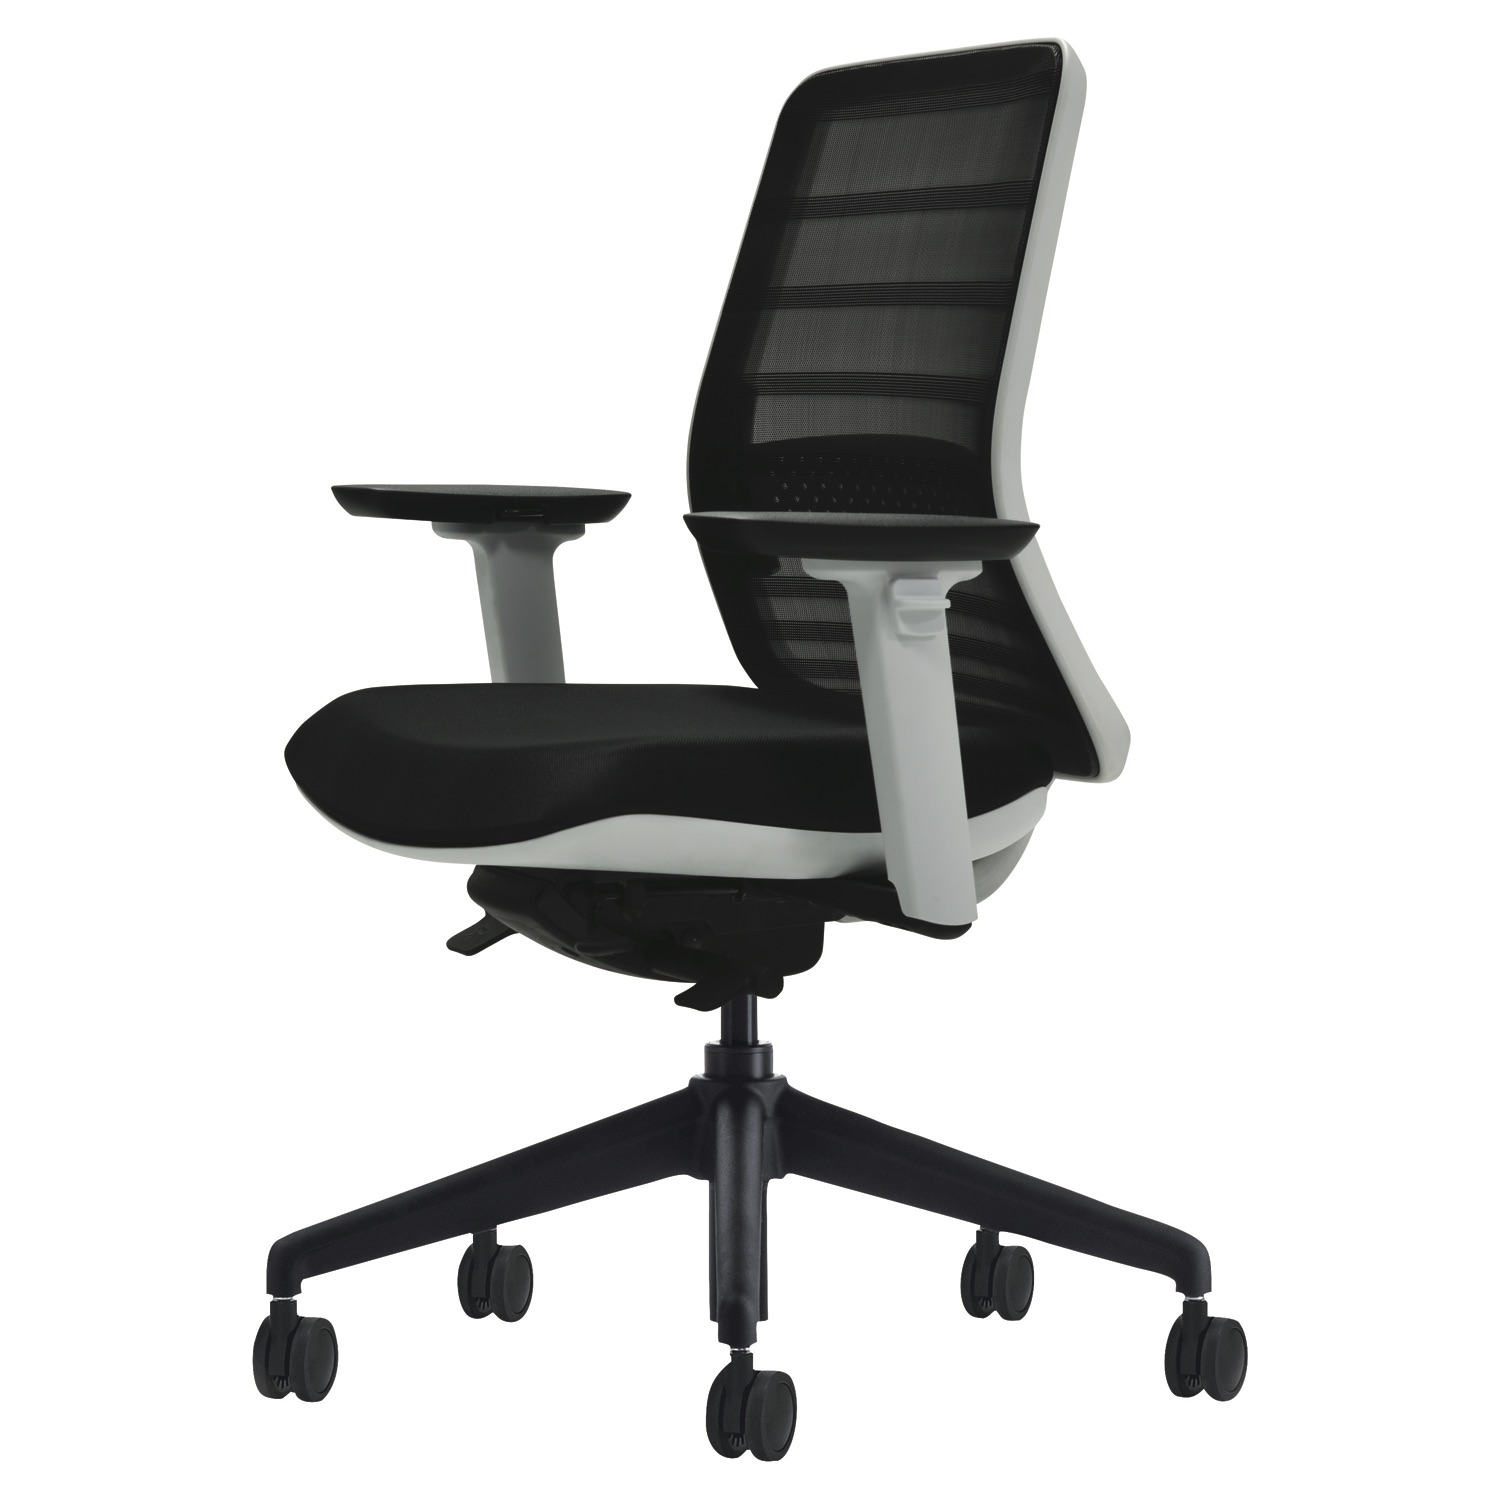 Tonique Home Working Chair Light Grey (Left)